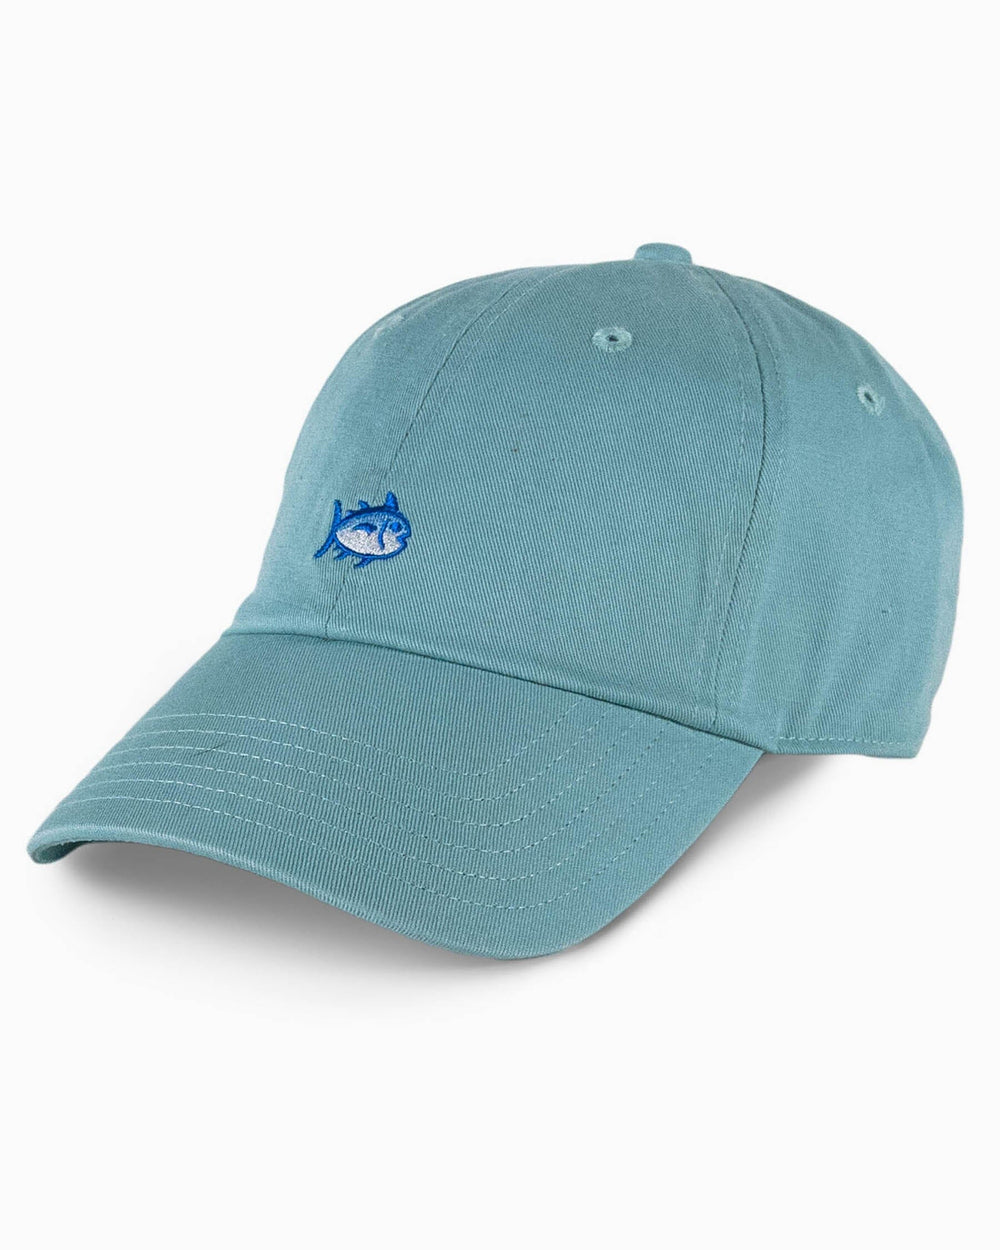 The front view of the Southern Tide Mini Skipjack Leather Strap Hat by Southern Tide - Light Green